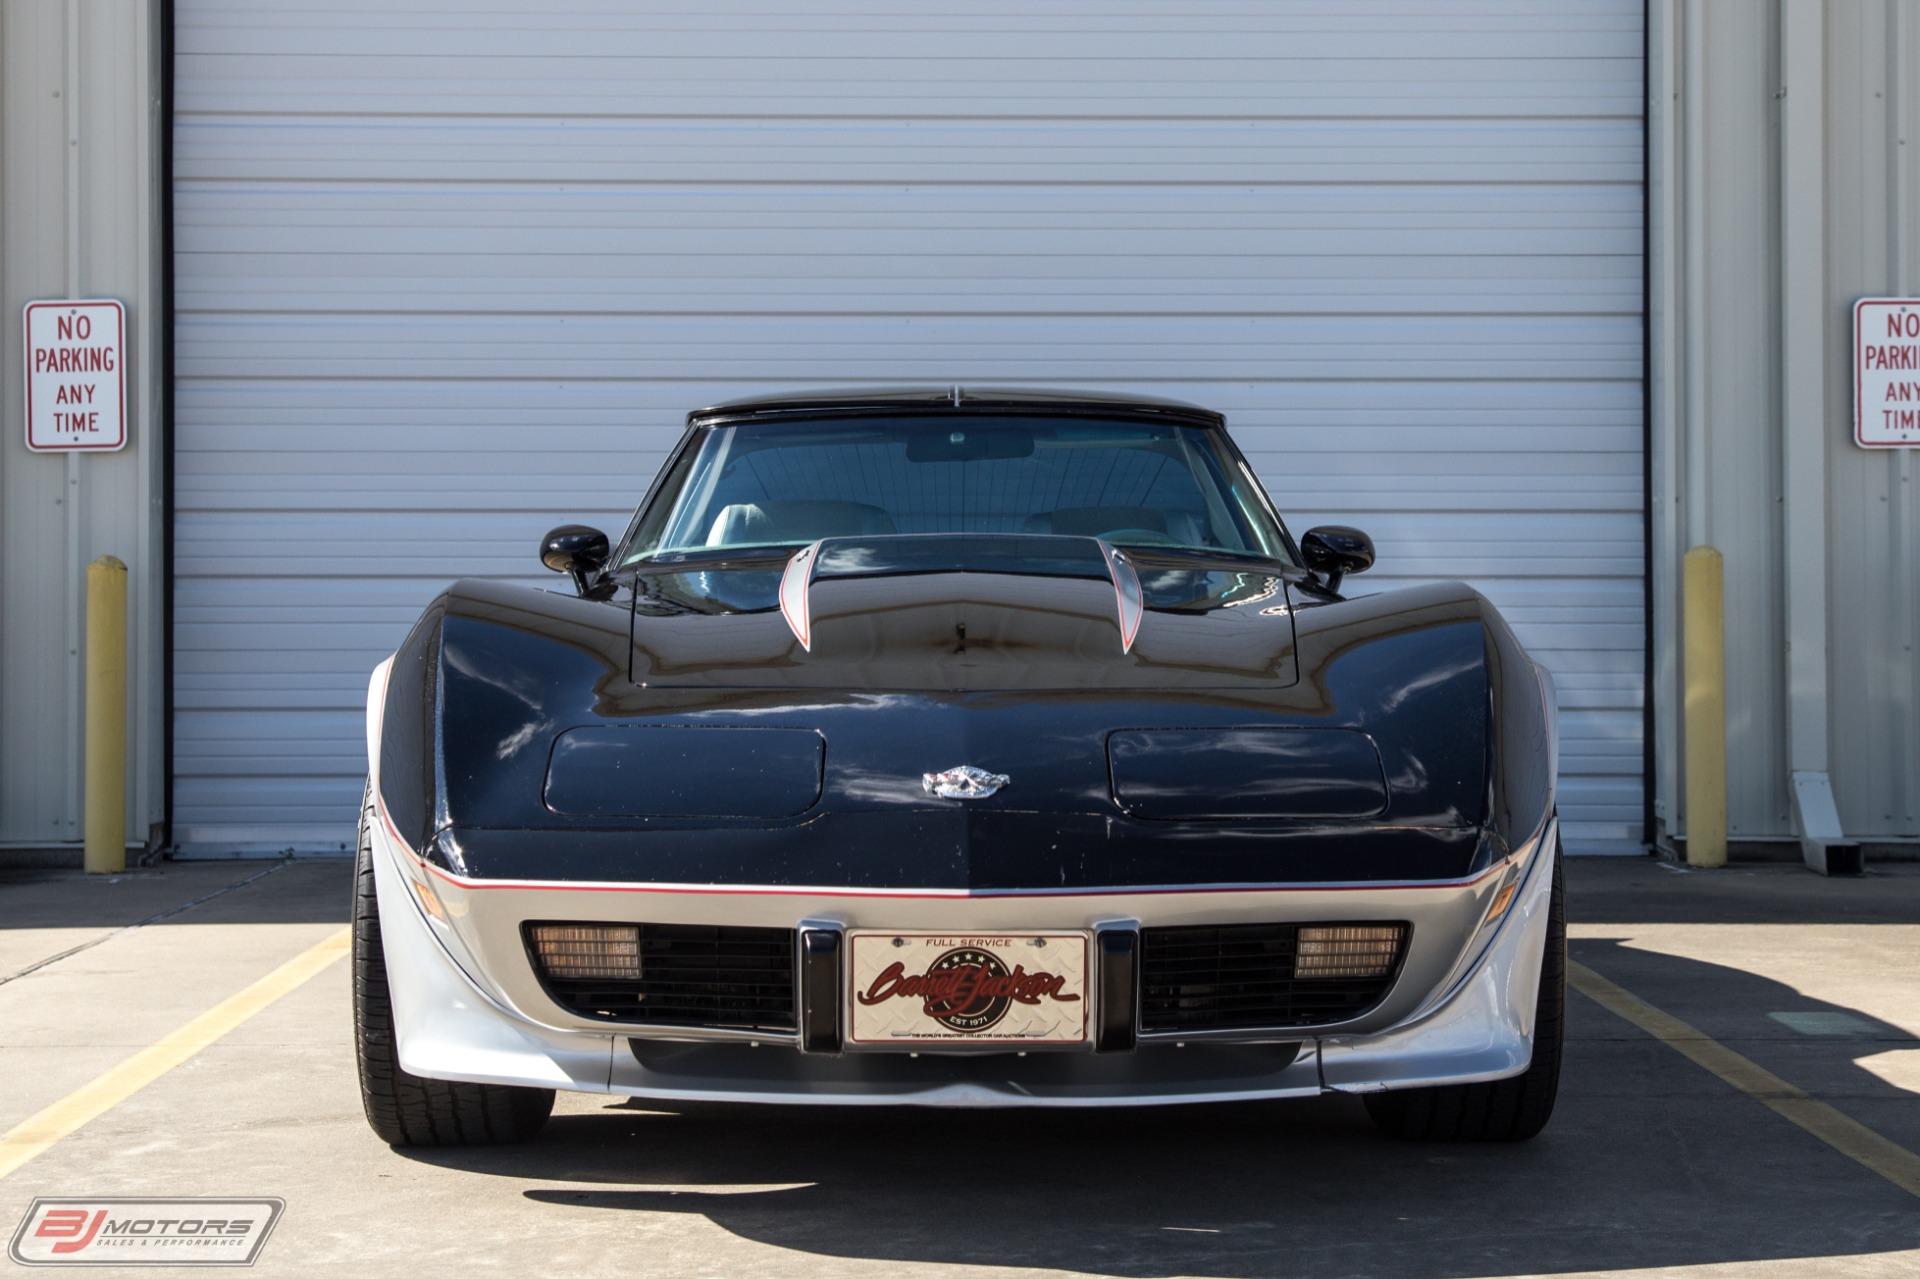 Used-1978-Chevrolet-Corvette-Indy-Pace-Car